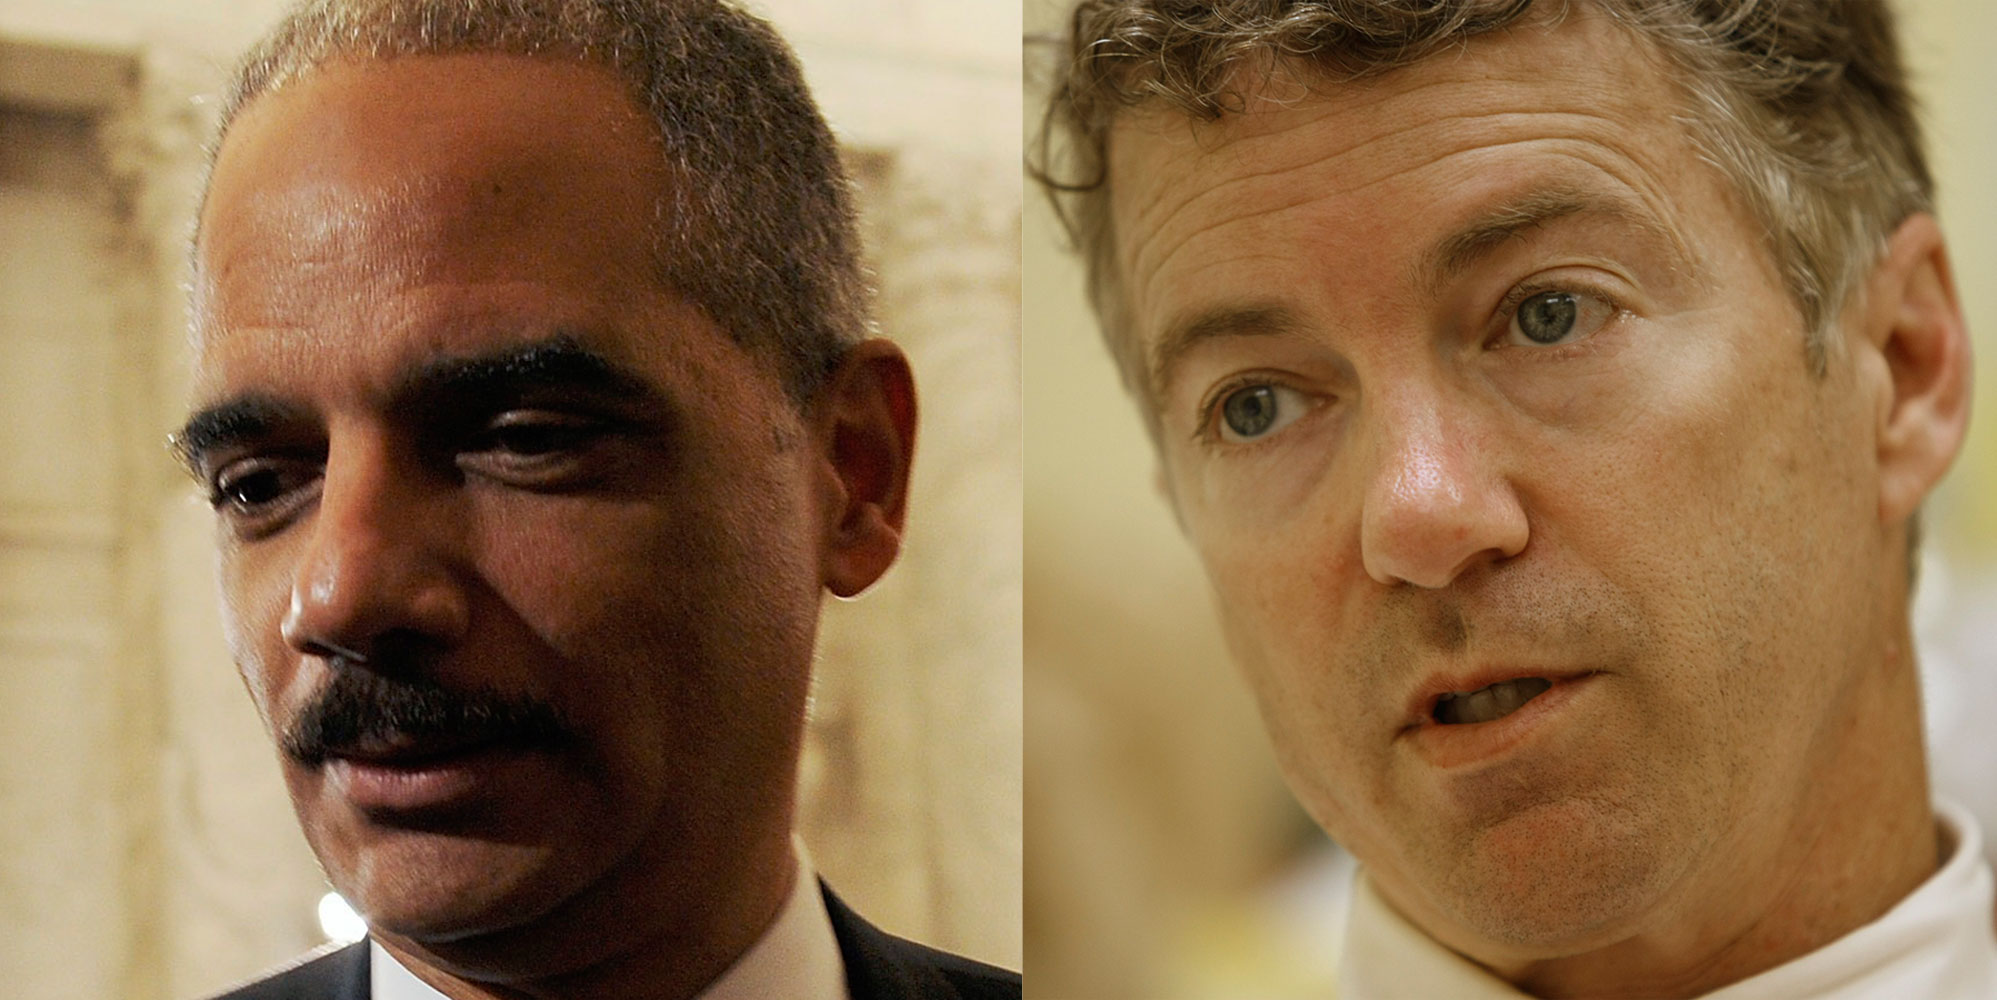 Rand Paul and Eric Holder Might Actually Get Something Important Done in Washington by Working Together